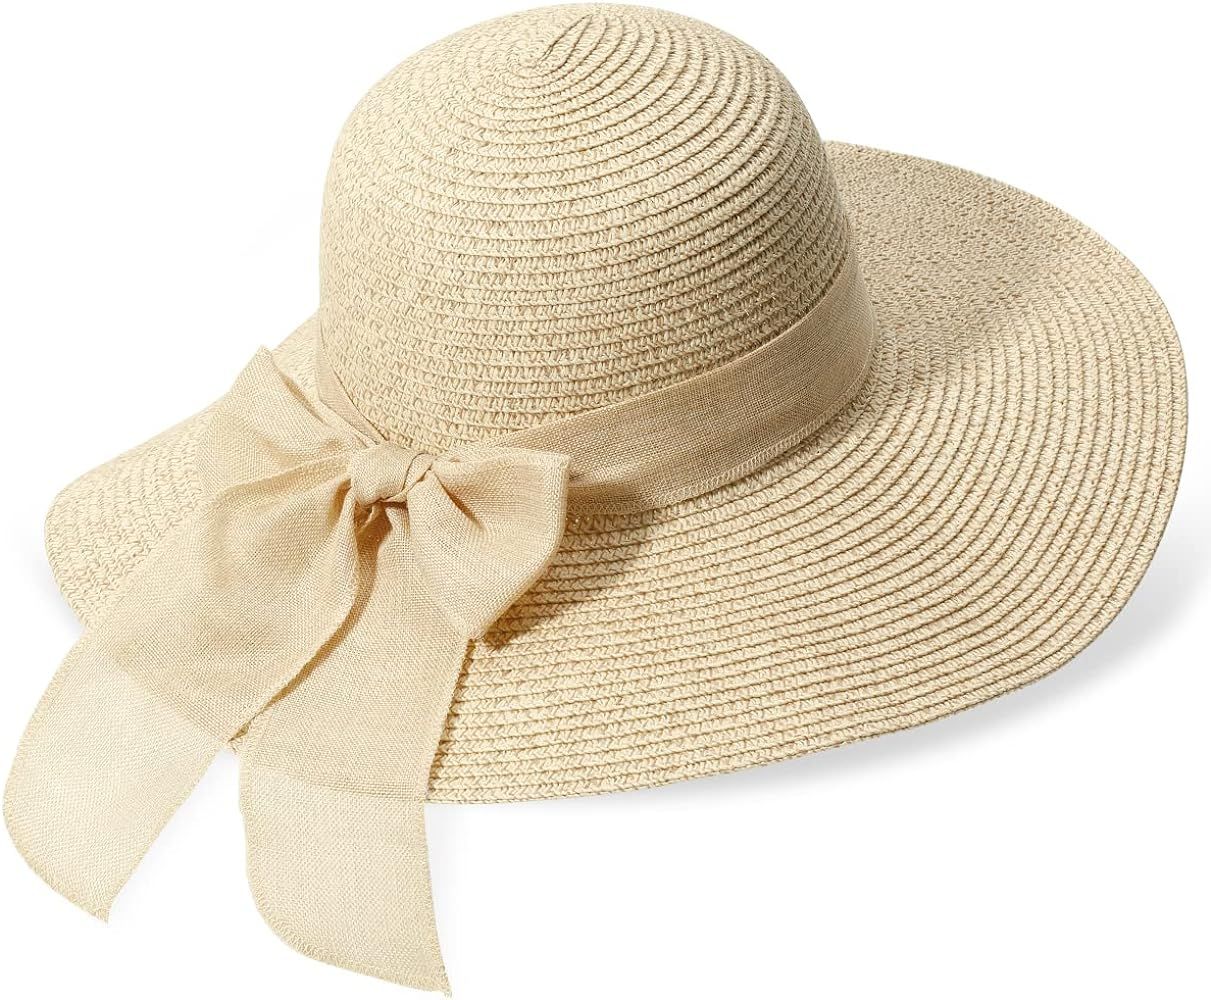 Womens Beach Straw Sun Hat: Large Ladies Foldable & Packable Floppy Hats with Wide Brim-UPF 50 UV Pr | Amazon (US)